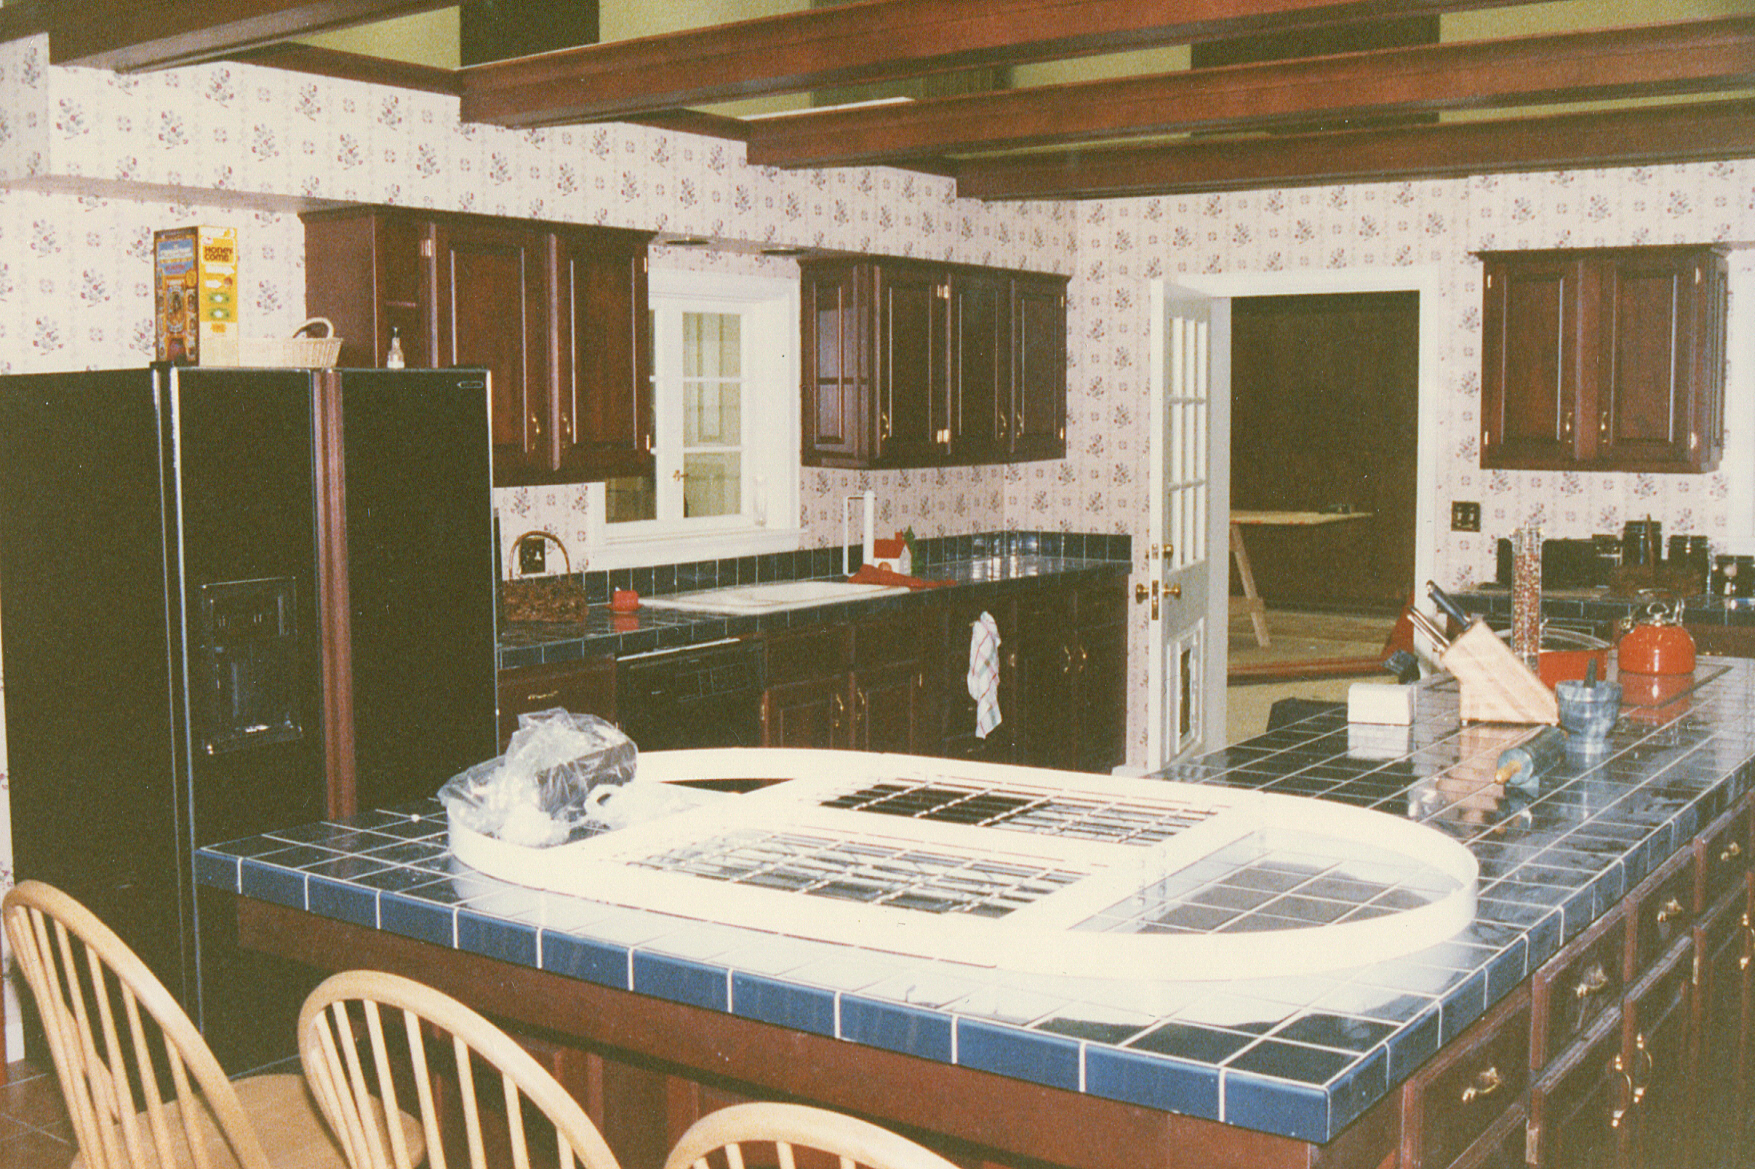 Home Alone. I laid out the kitchen using Aristocraft cabinets for 13 actors. Learned that blue reads as black on film.